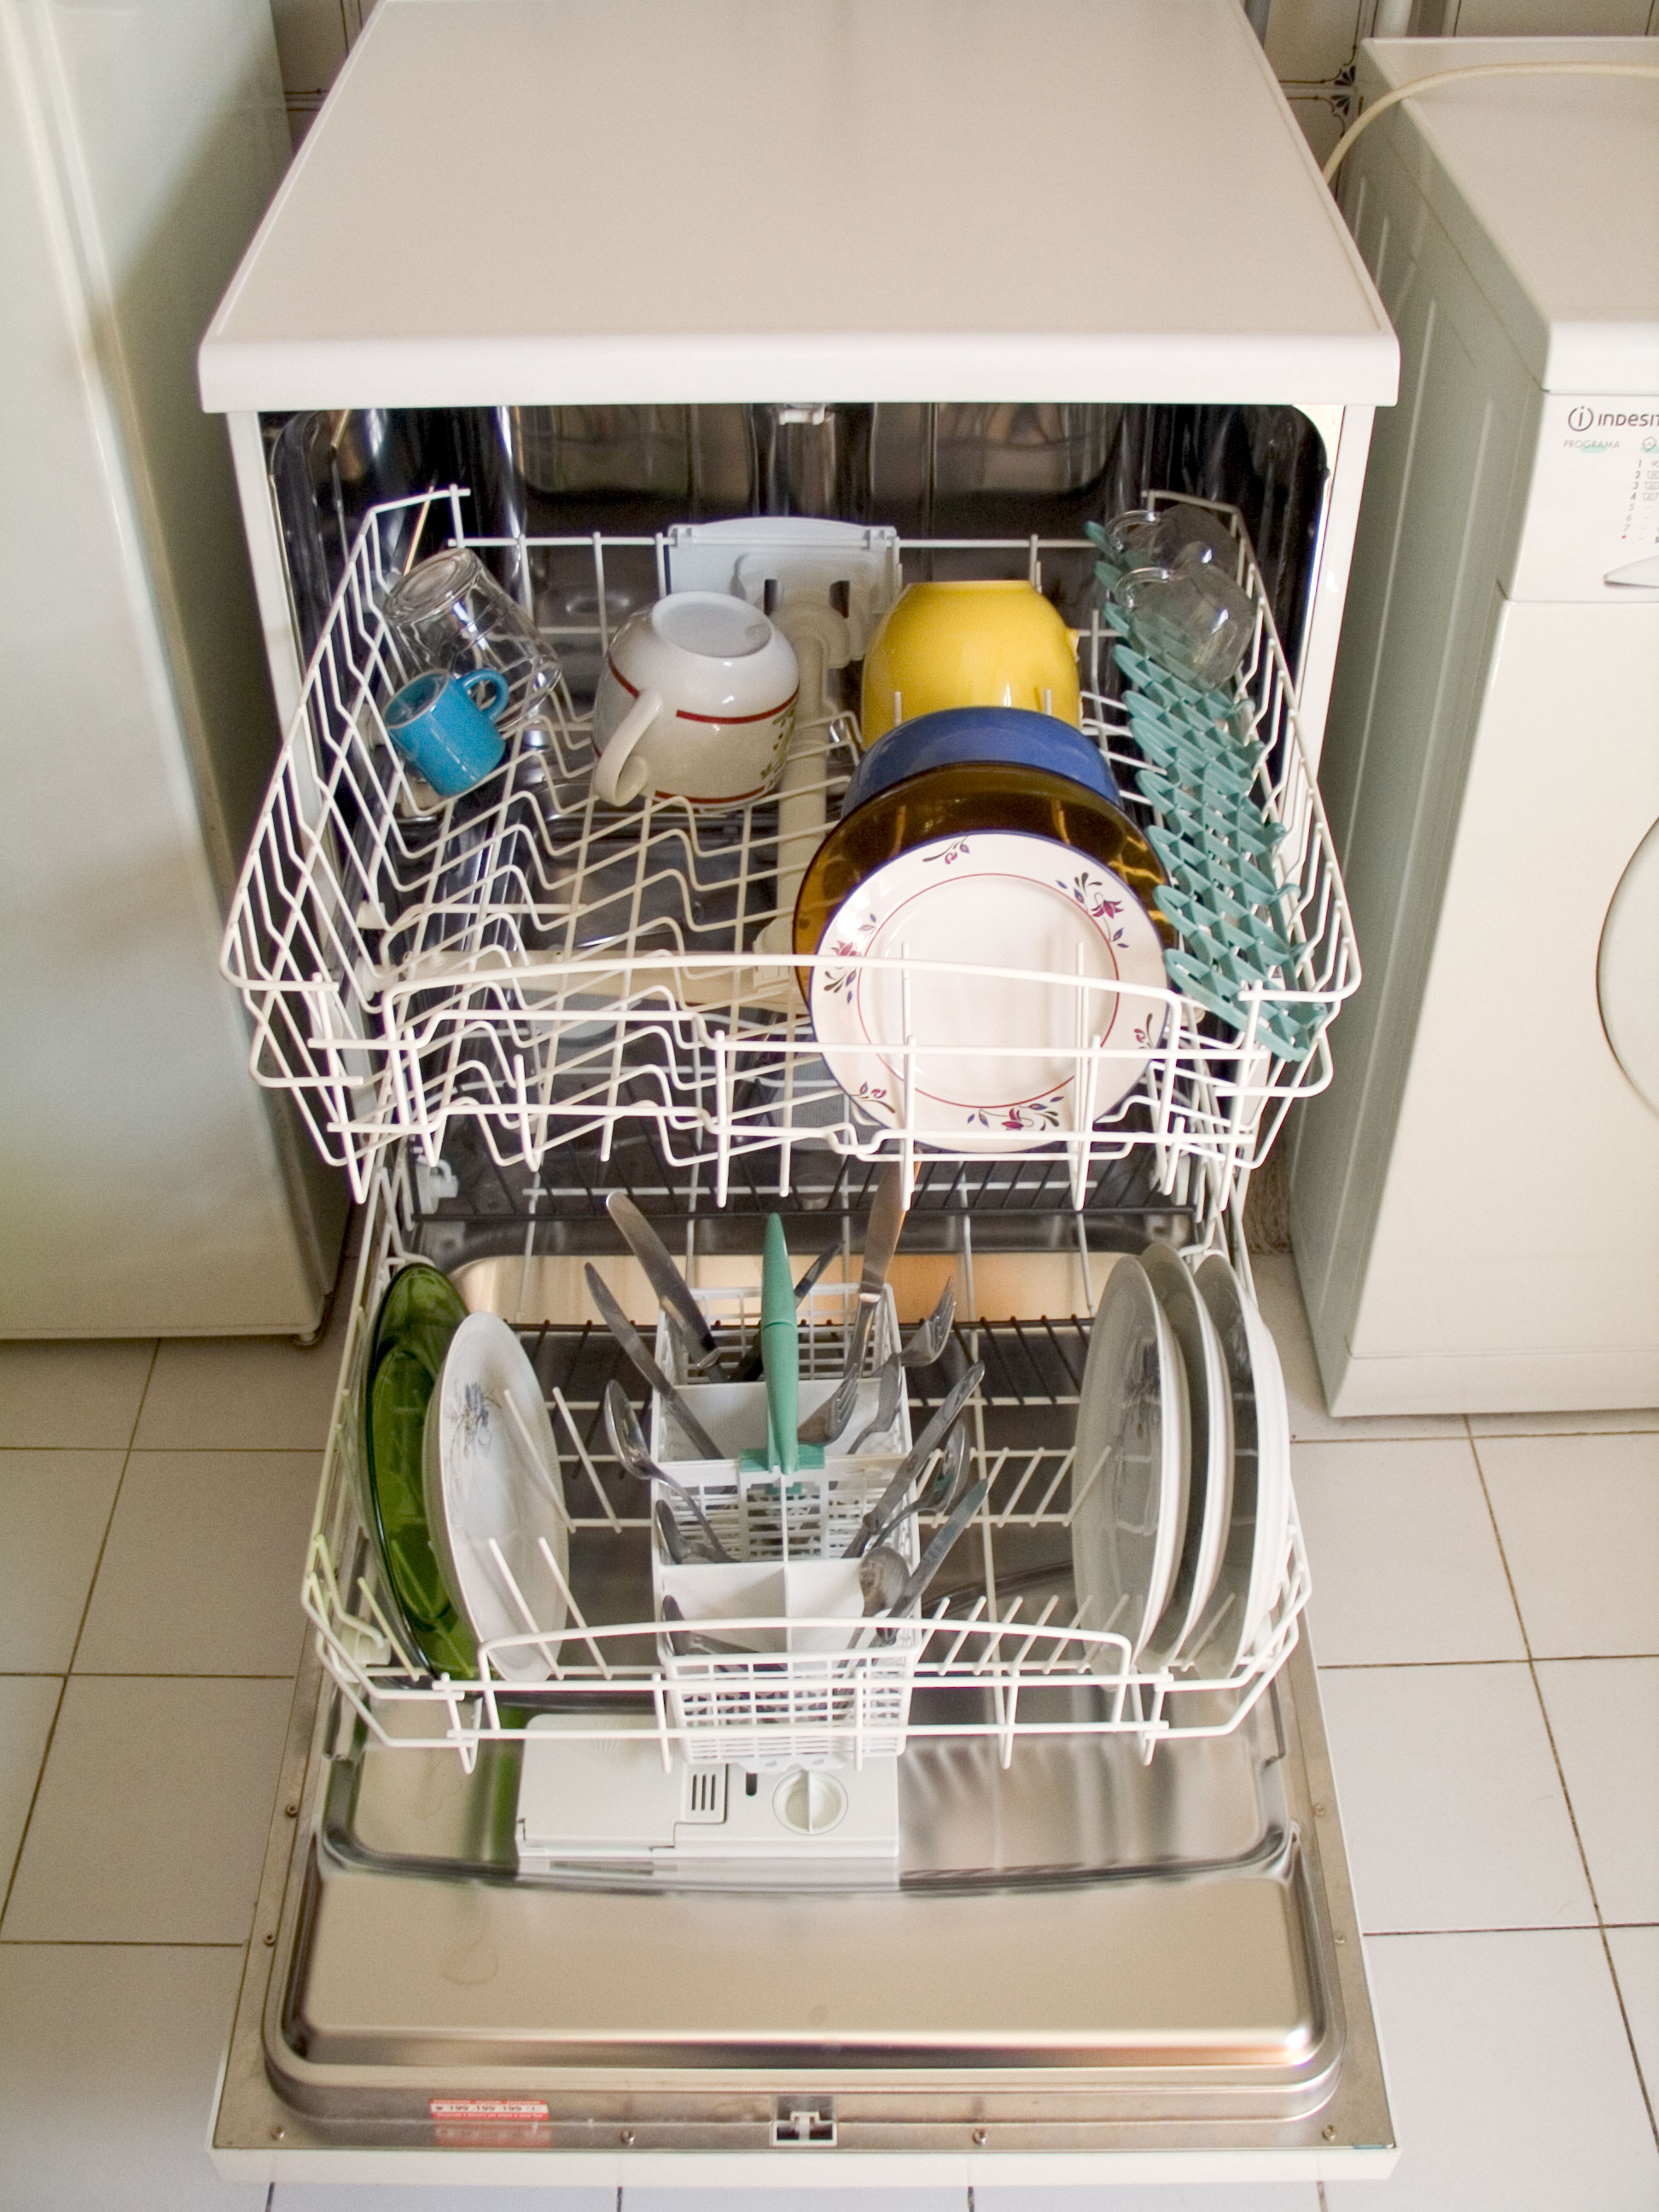 http://dic.academic.ru/pictures/wiki/files/68/Dishwasher_open_for_loading.jpg